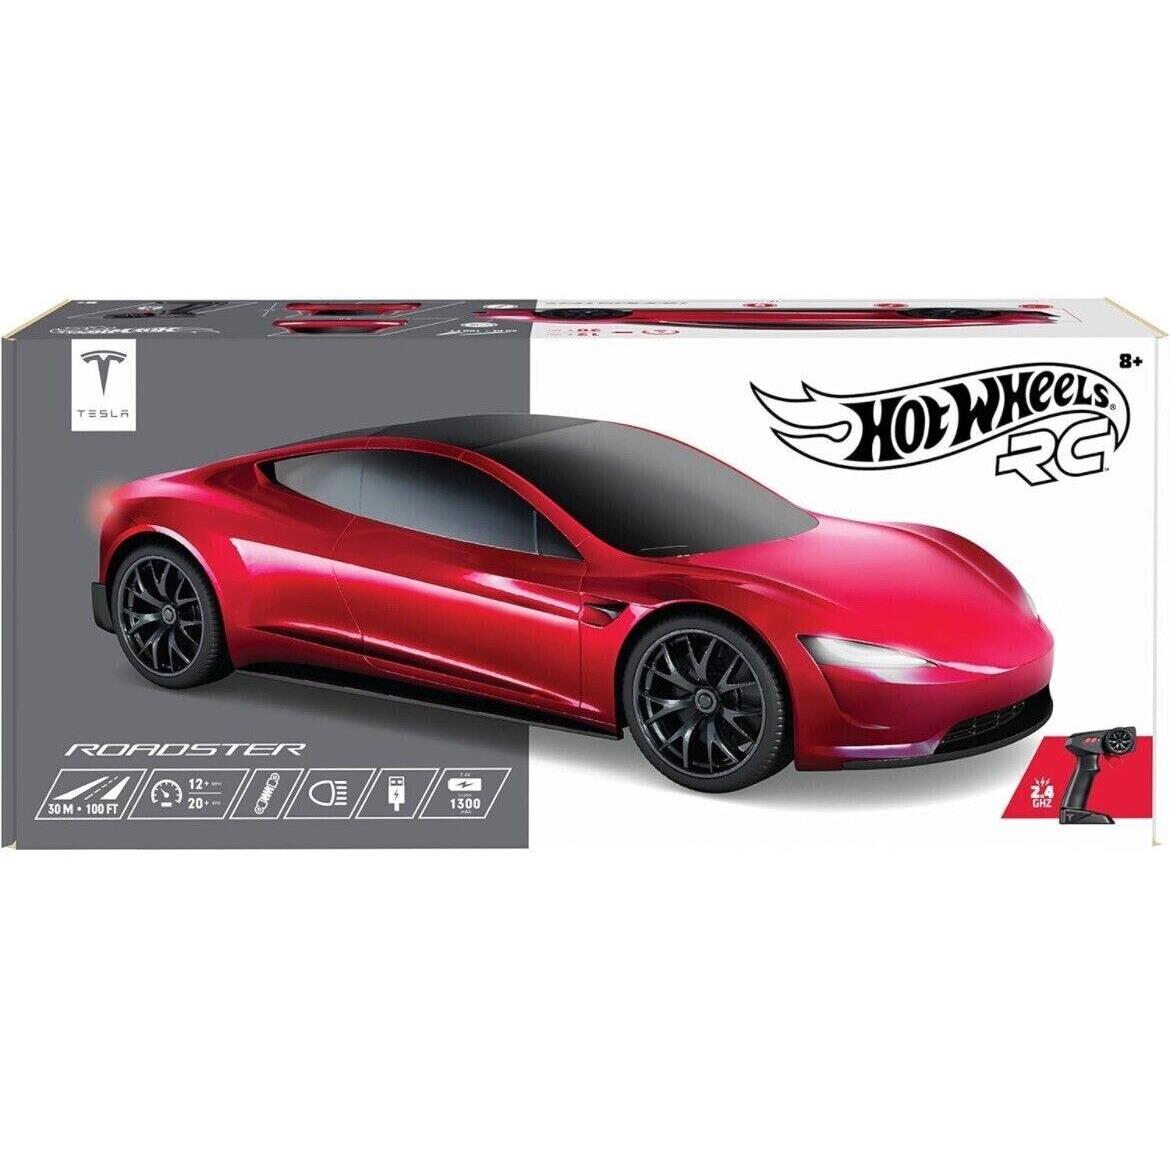 Hot Wheels Tesla Roadster Red Remote Control RC 2.4 Ghz Toy 1:10 Rare